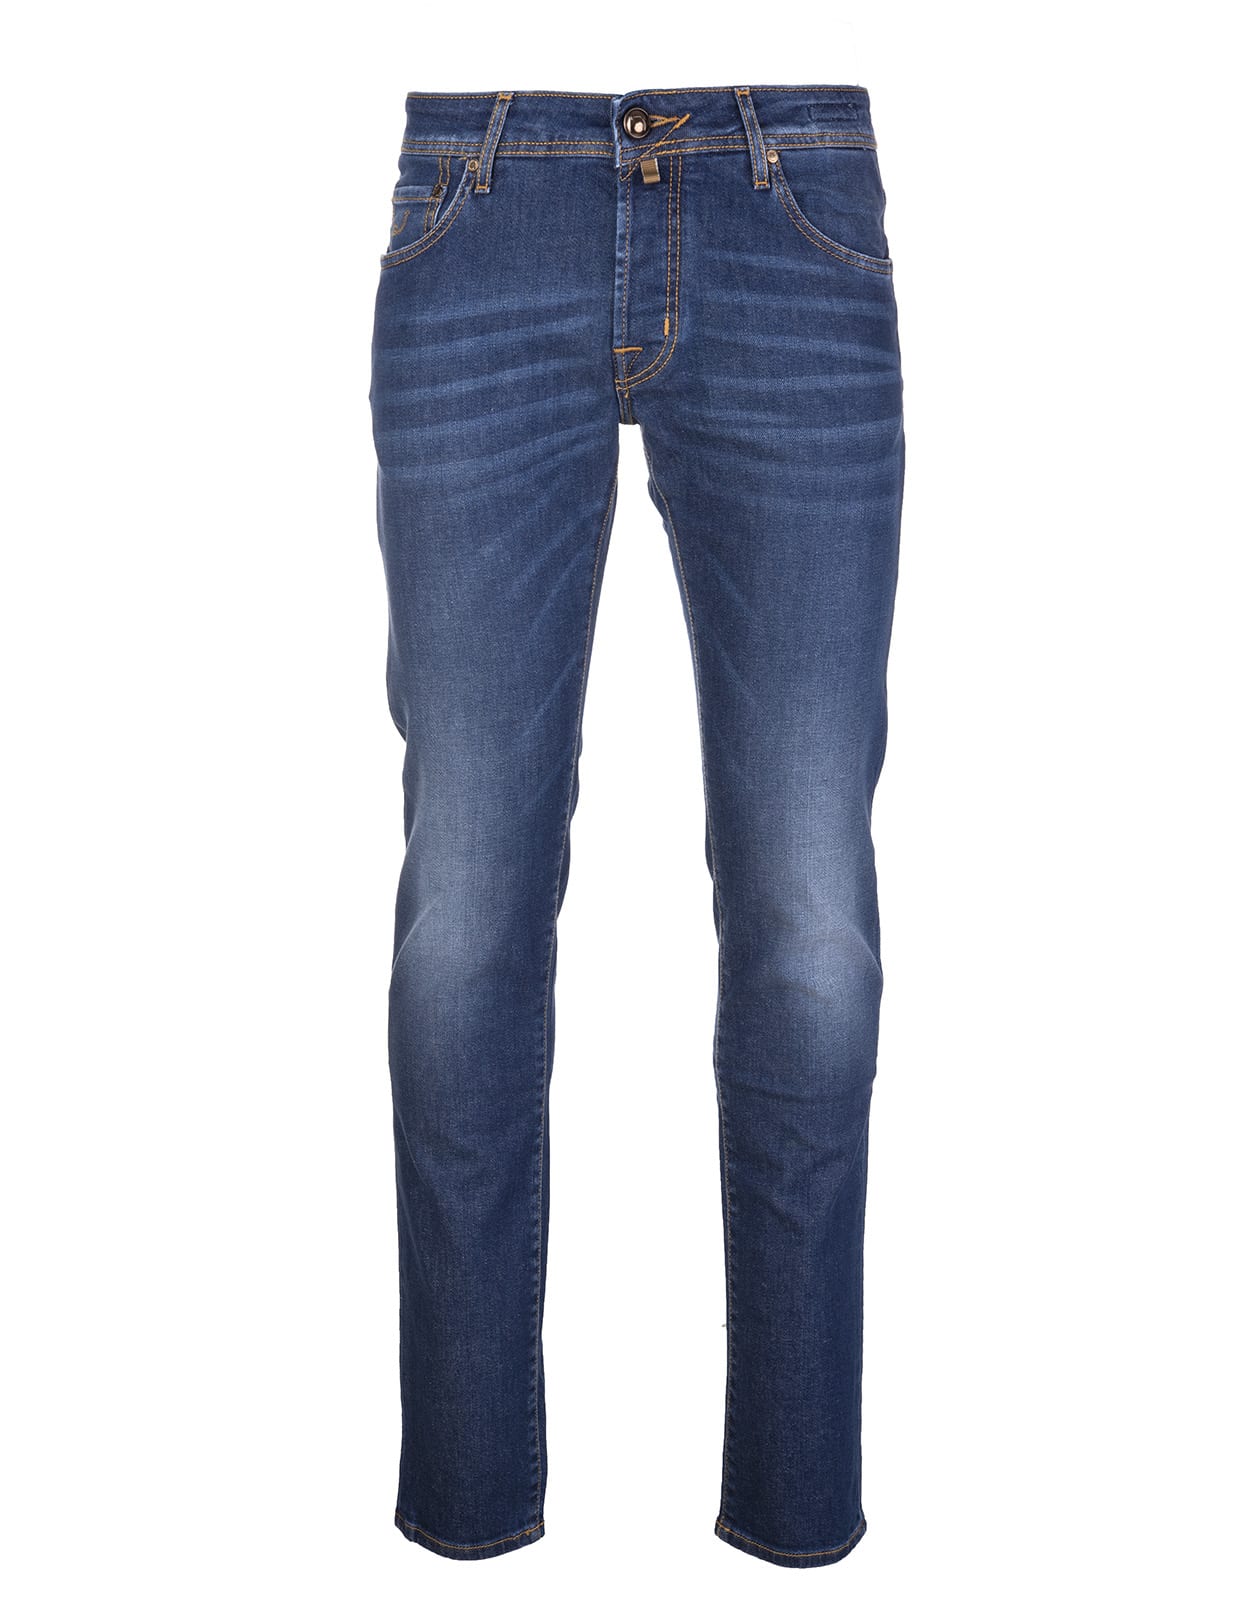 Jacob Cohen Man Dark Blue Slim Fit Jeans With Contrast Stitching